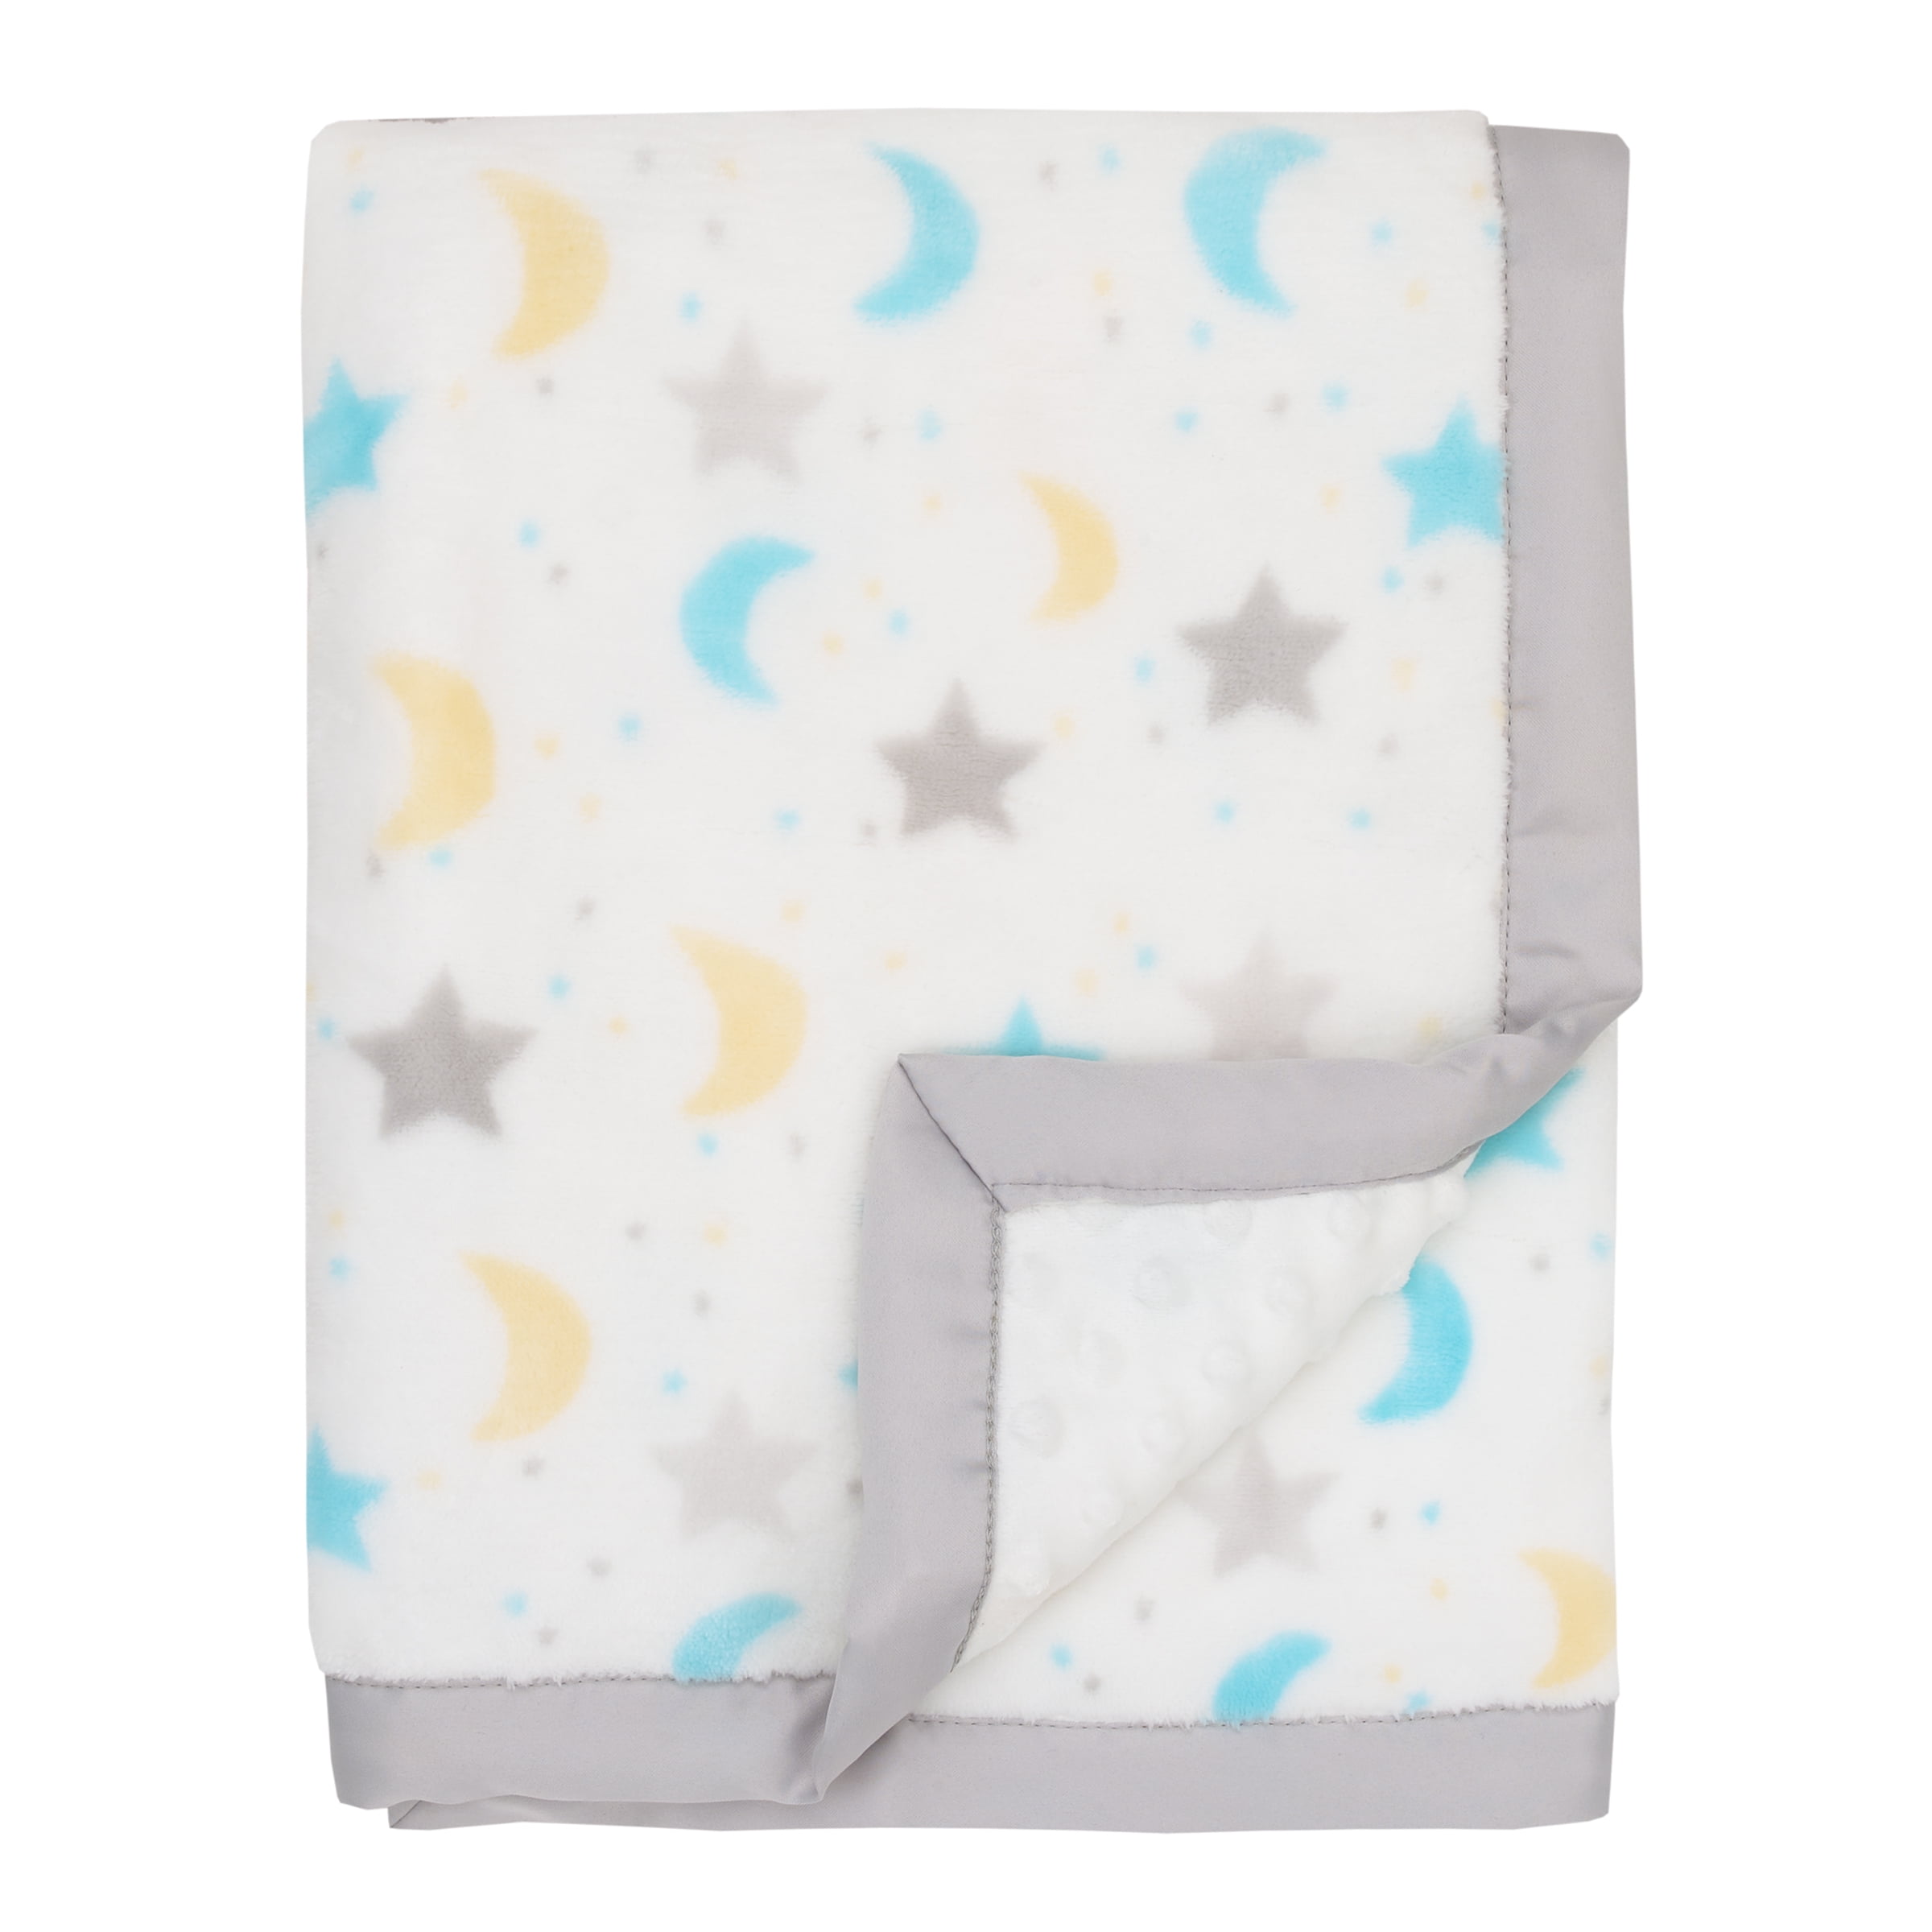 NEW STAR GRAY / BLUE BABY BOYS SECURITY BLANKET BUDDY LUVIE PARENTS CHOICE 